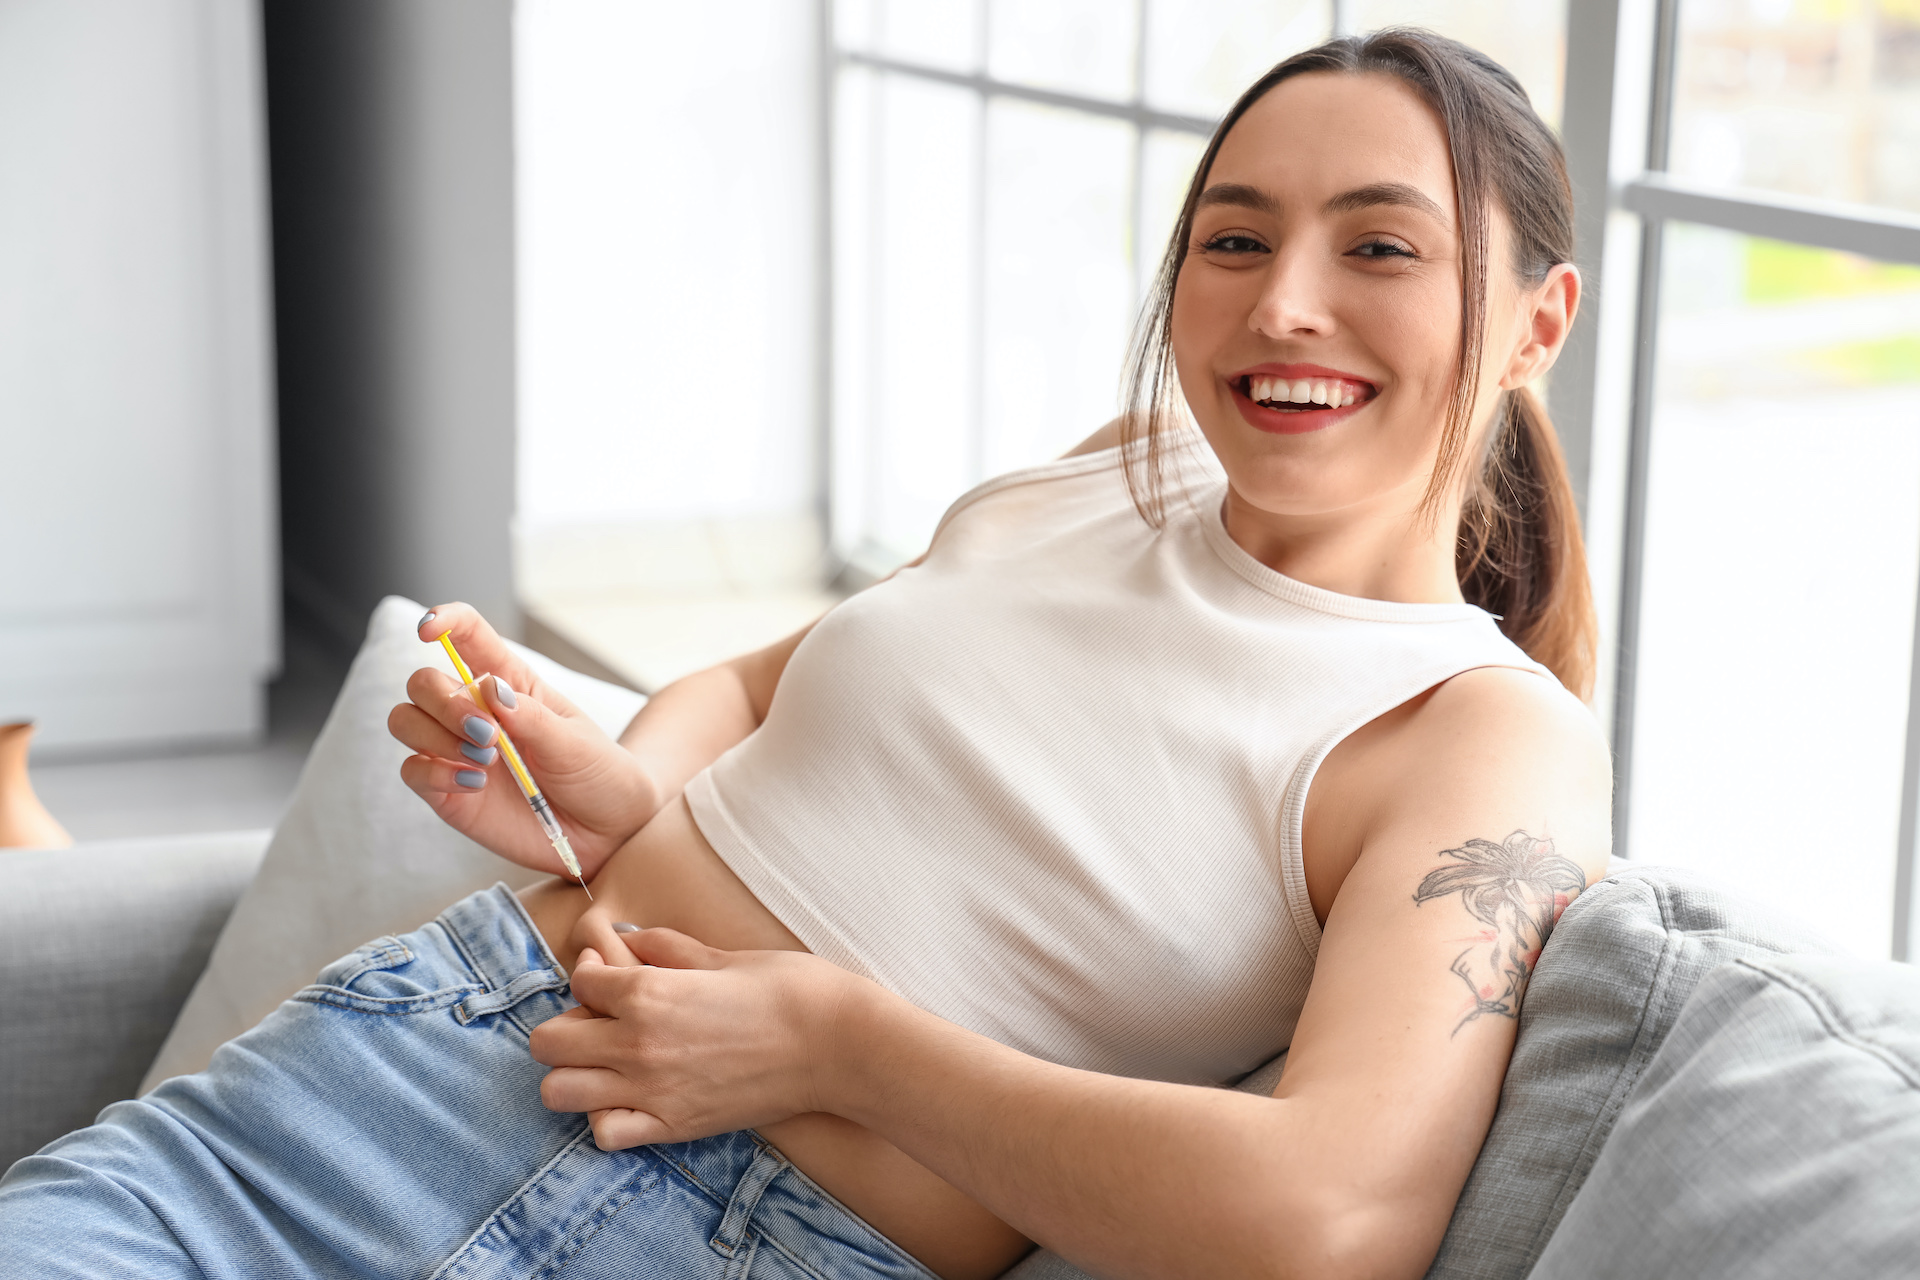 As part of the egg donation process, egg donors will self-inject hormone fertility medications into their lower abdomen for 10-12 days. Learn more!